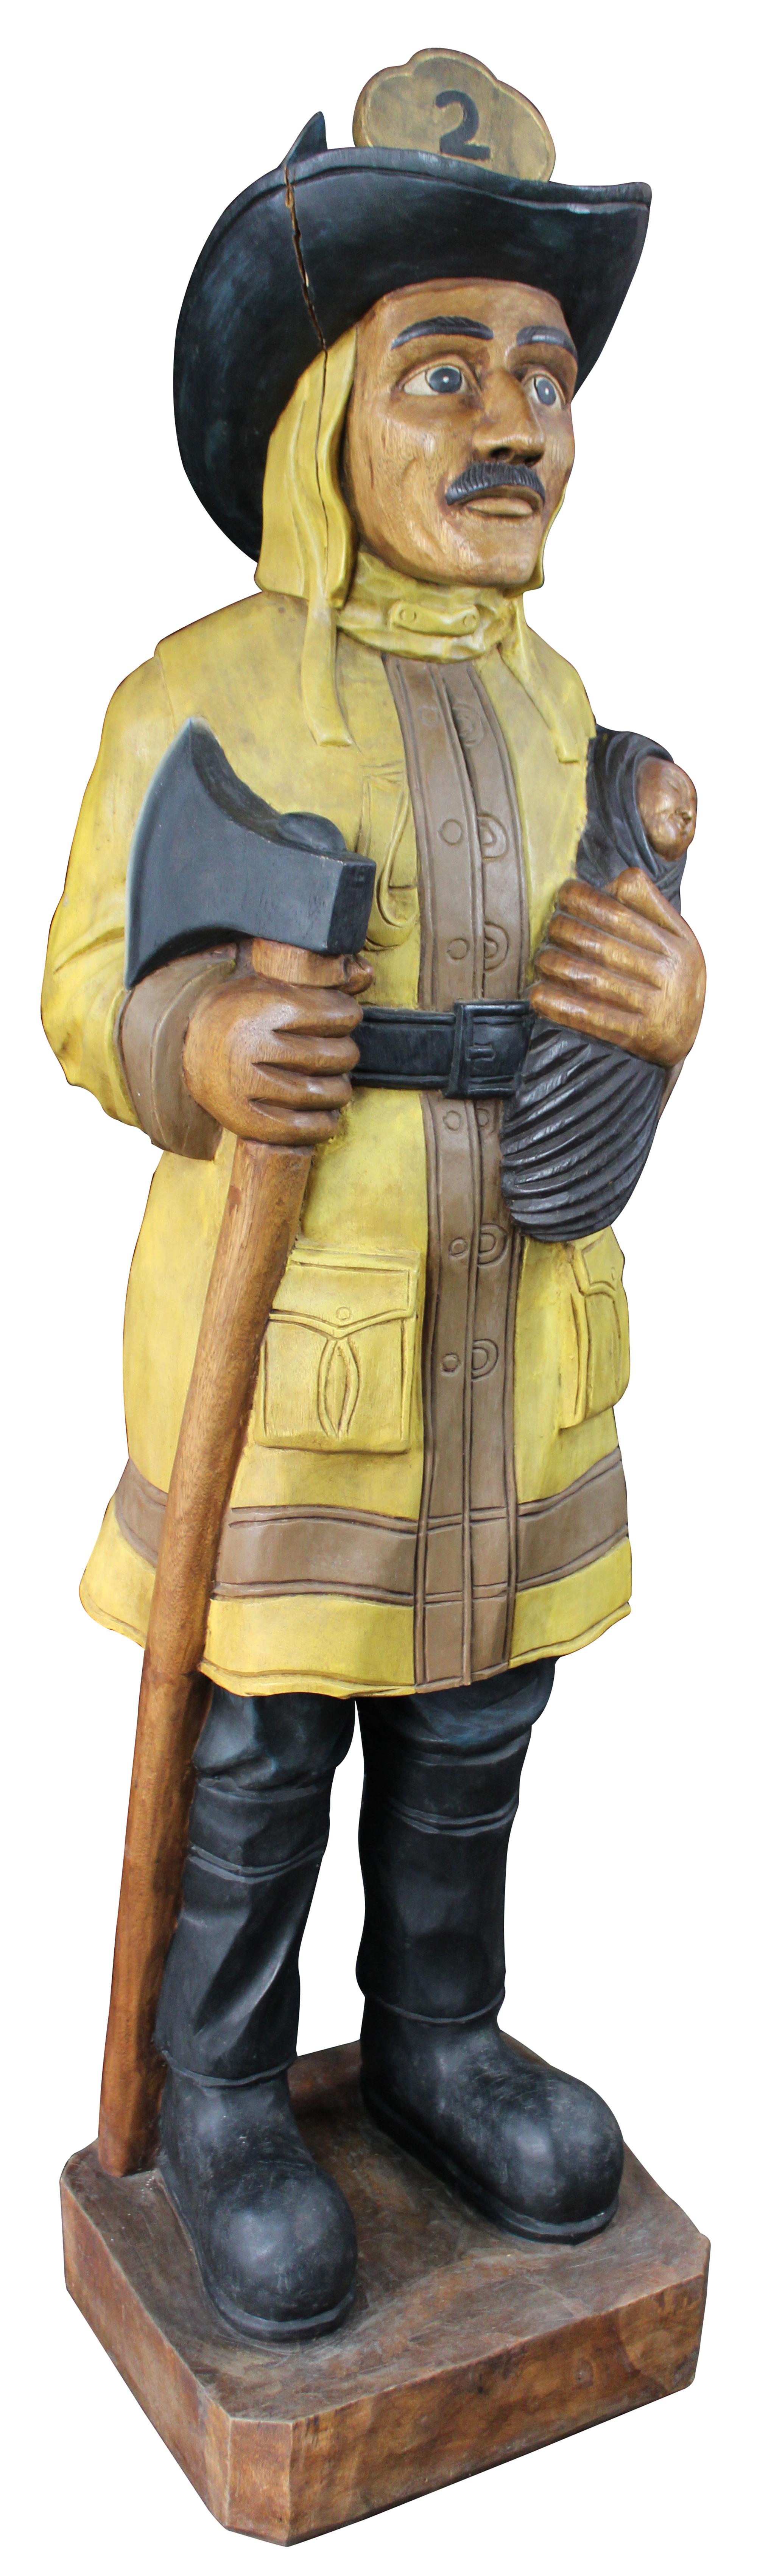 Vintage cigar store fireman or firefighter. Features a fireman in yellow with black boots and #2 hat holding an ax and baby. Carved from one piece of wood.
  